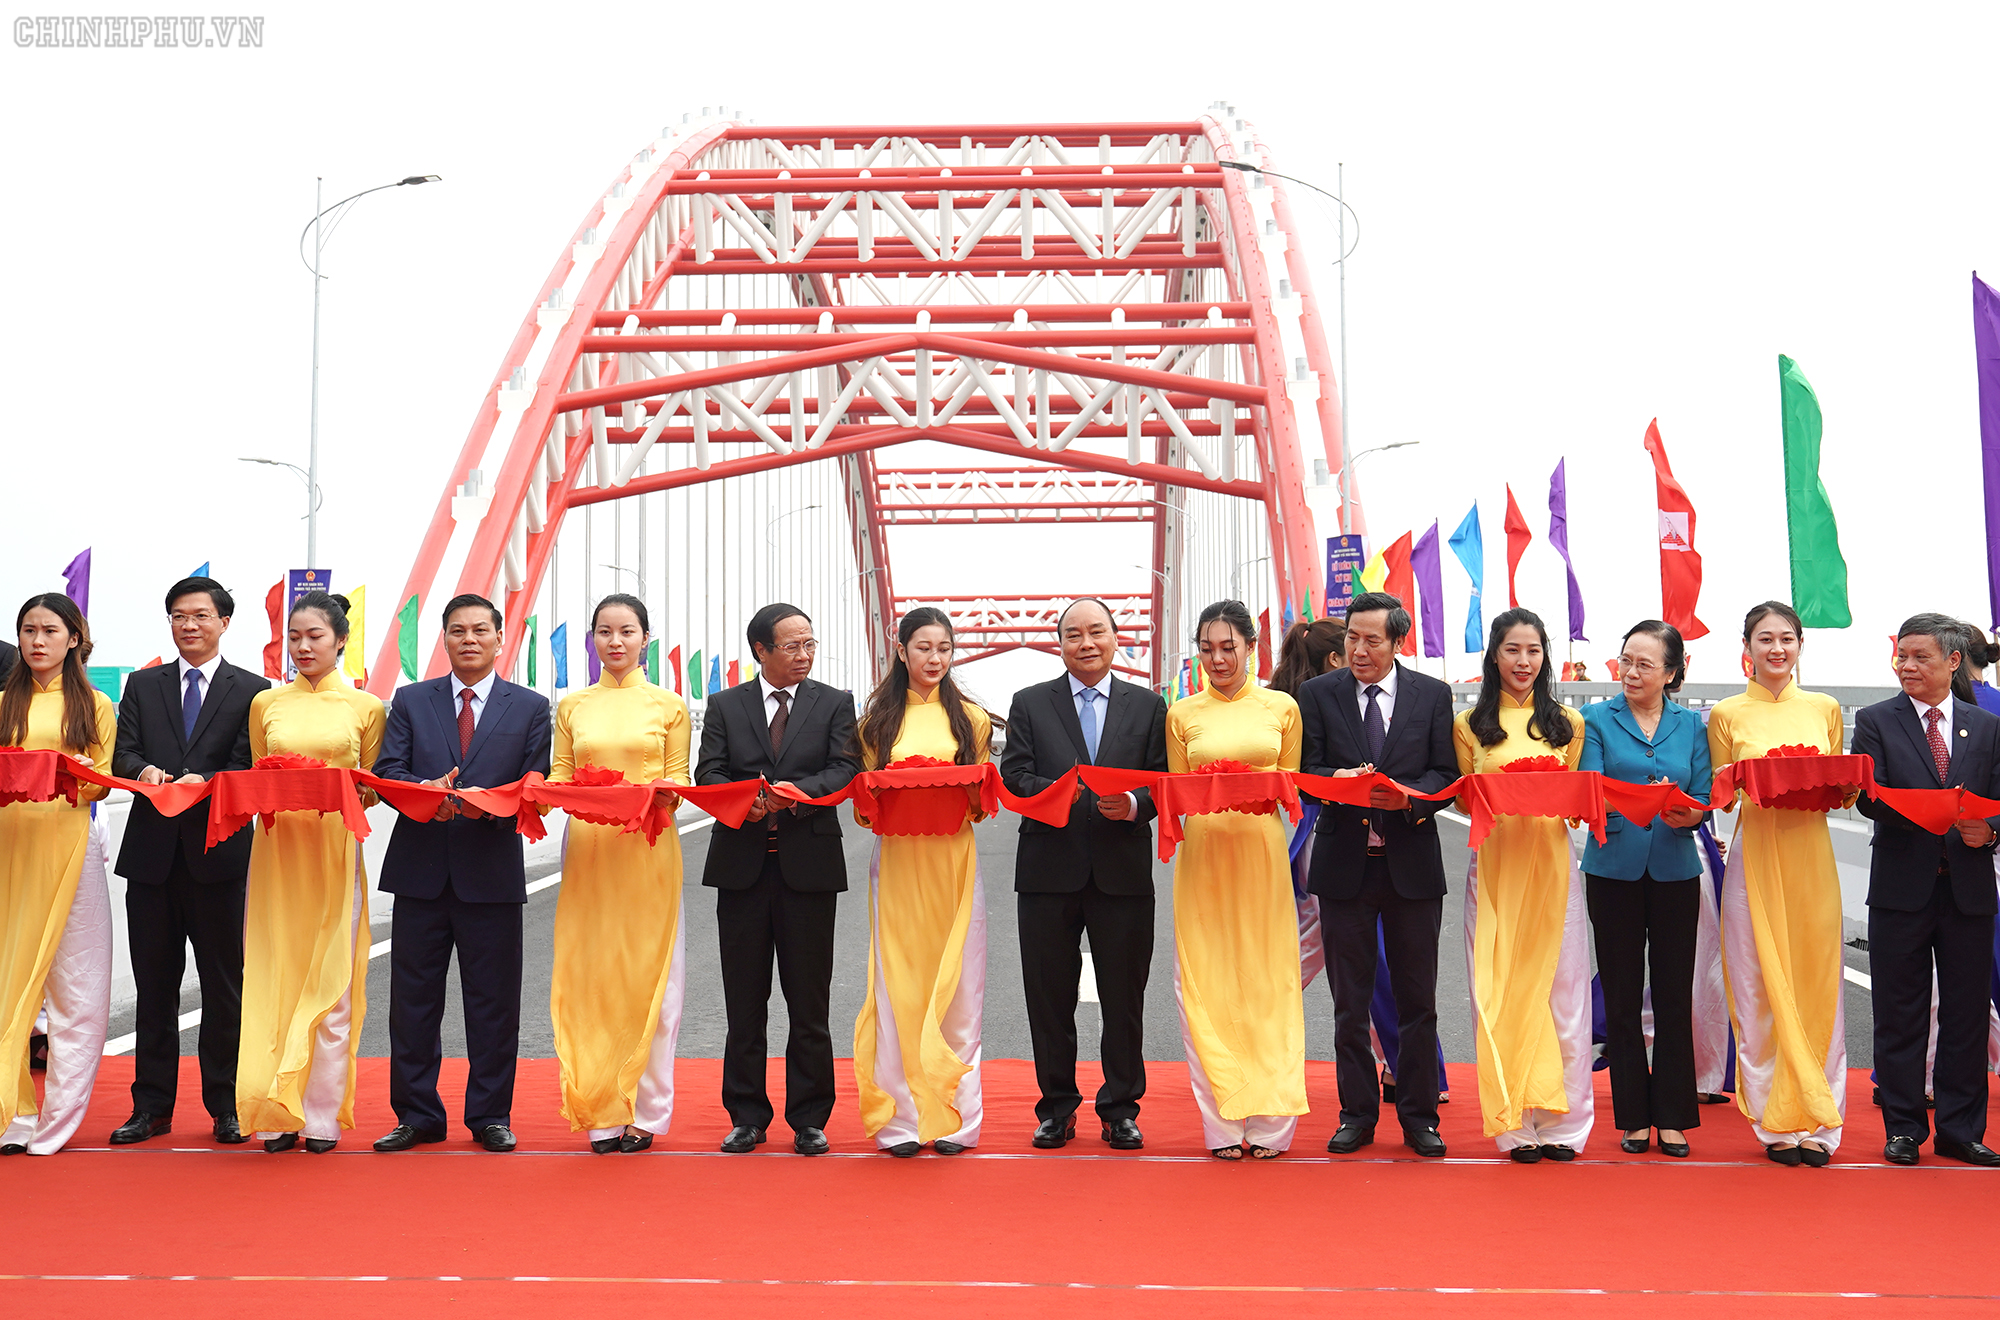 PM cuts ribbon on VN's largest arch bridge into use